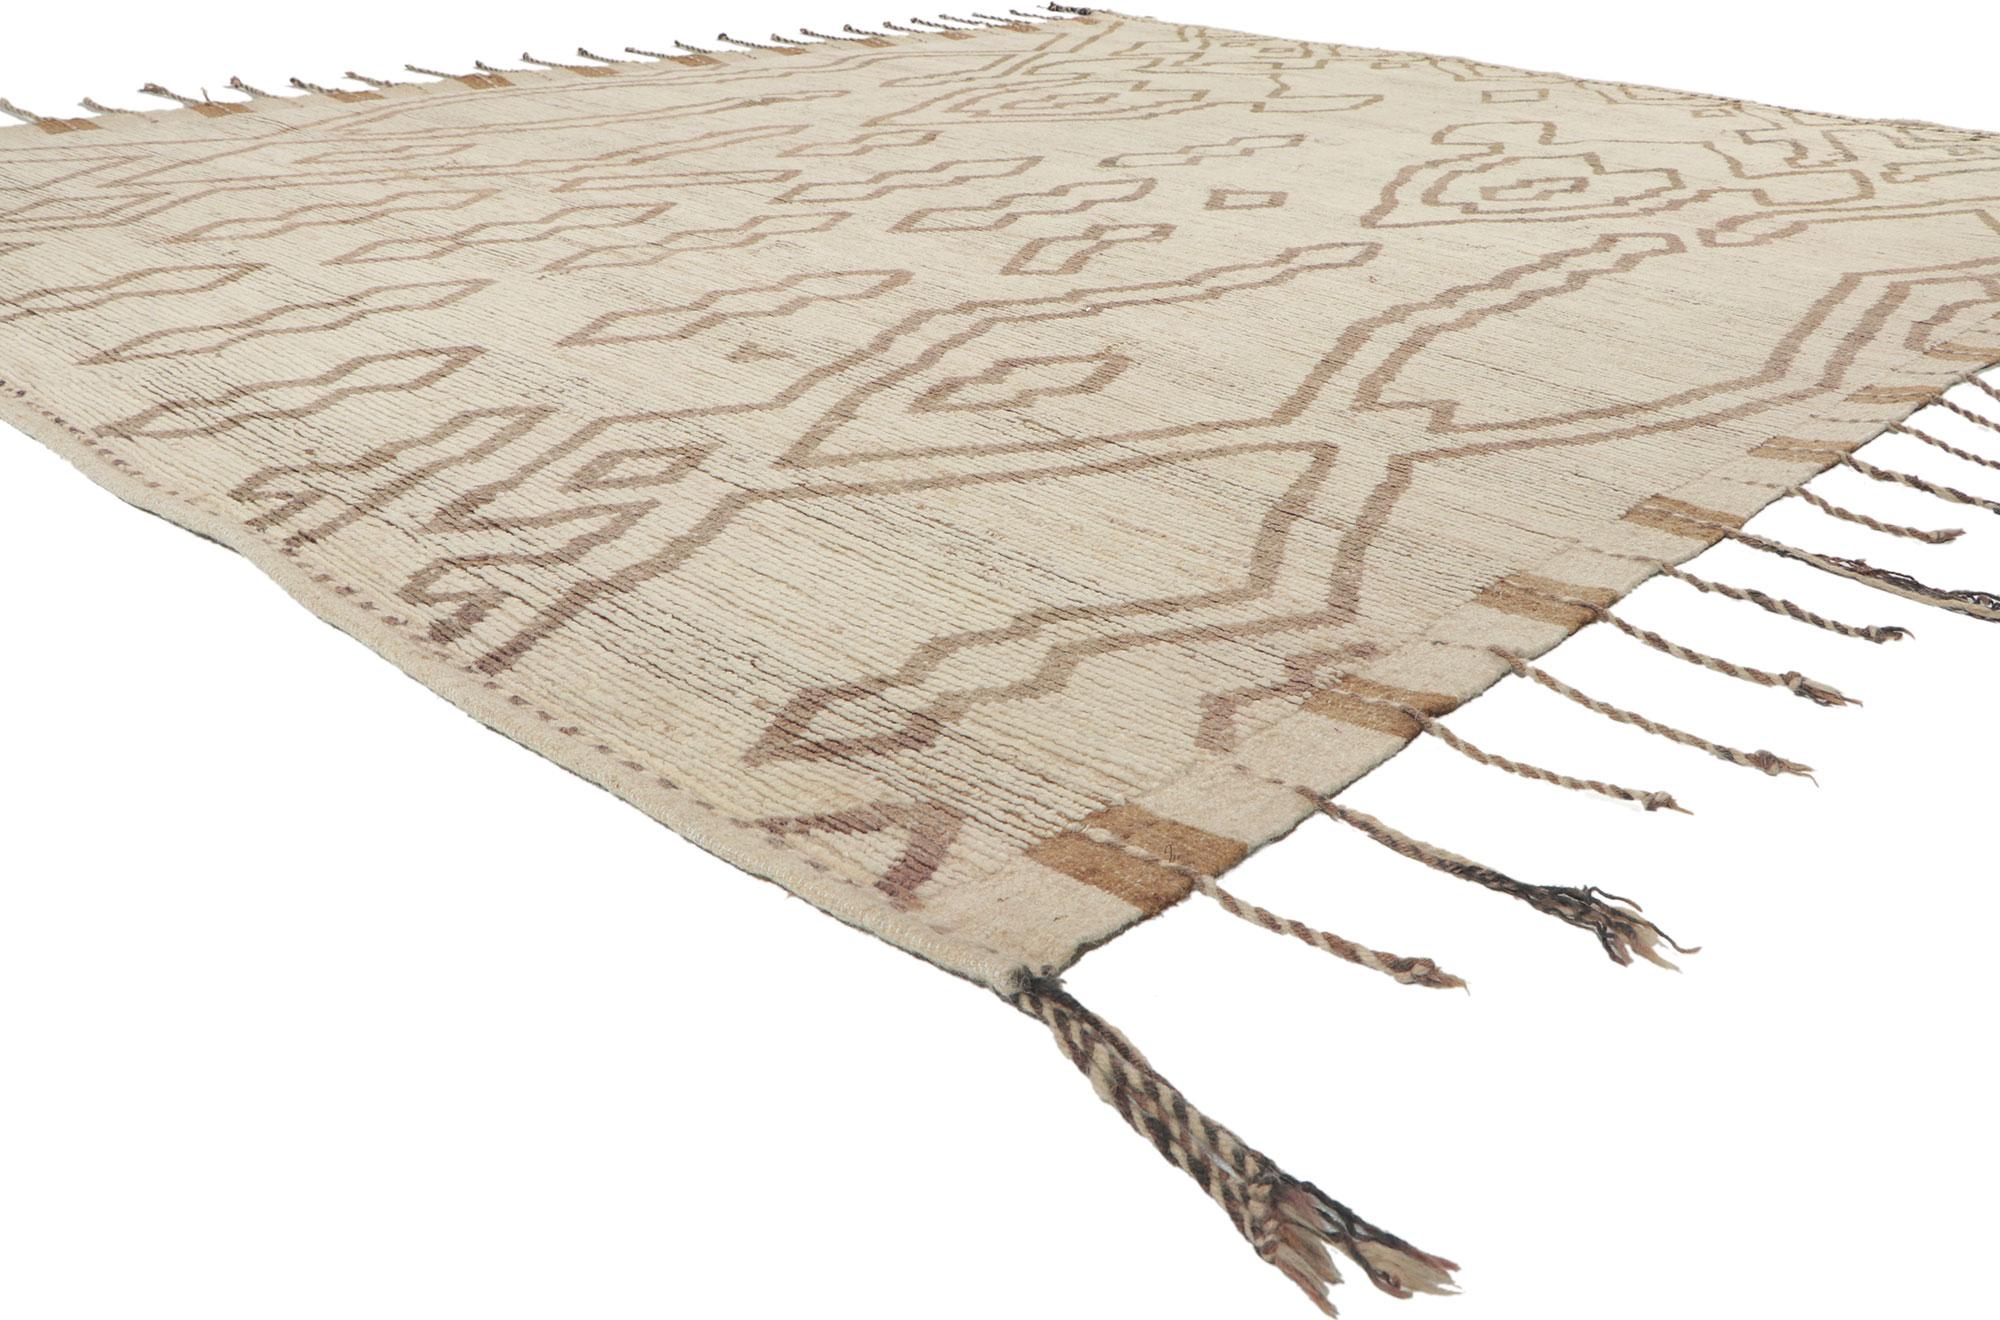 80807 new Contemporary Moroccan rug, 09'03 x 11'09. Showcasing an expressive design, incredible detail and texture, this hand knotted wool Moroccan style rug is a captivating vision of woven beauty. The eye-catching tribal pattern and earthy